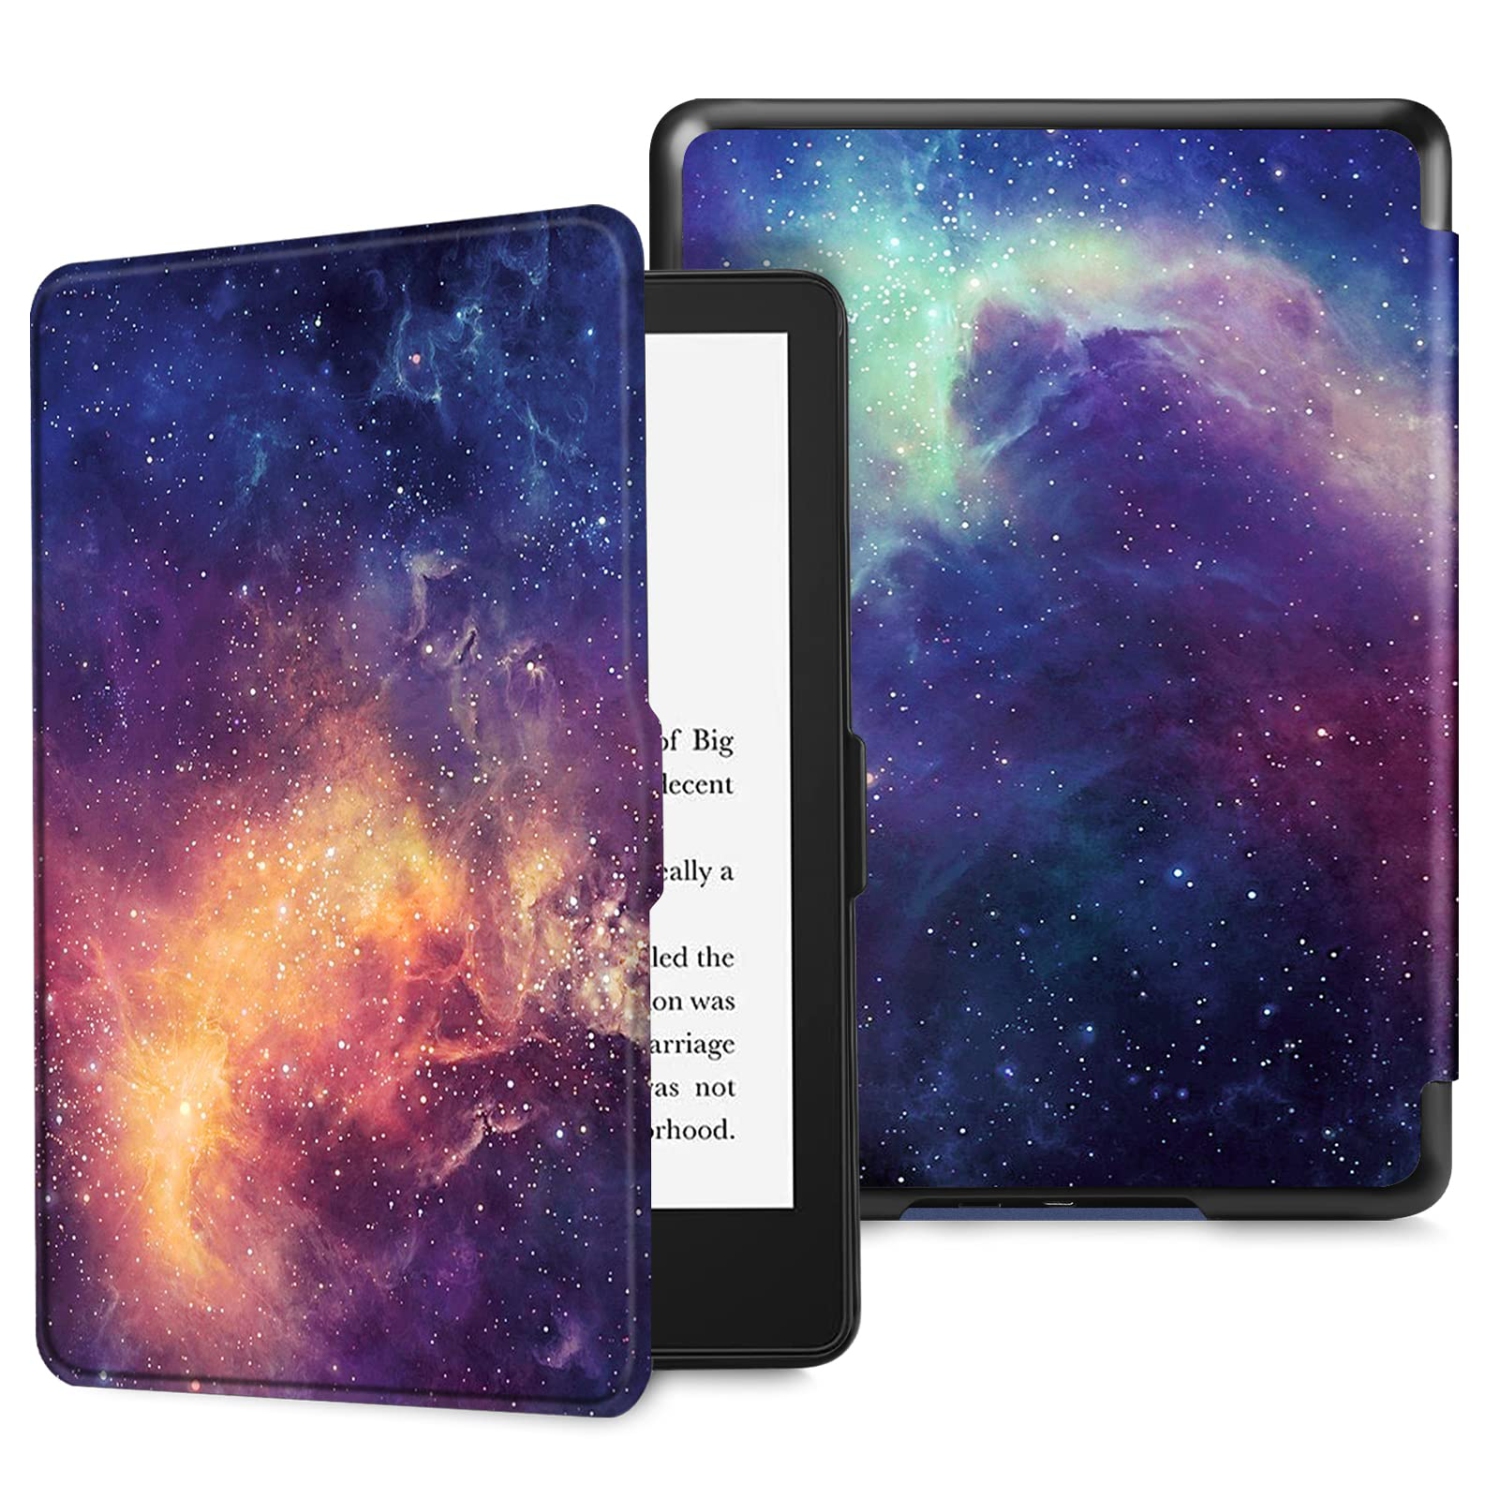 Slimshell Case for 6.8" Kindle Paperwhite (11th Generation - 2021) and Kindle Paperwhite Signature Edition - Premium Lightweight PU Leather Cover with Auto Sleep/Wake (Galaxy)